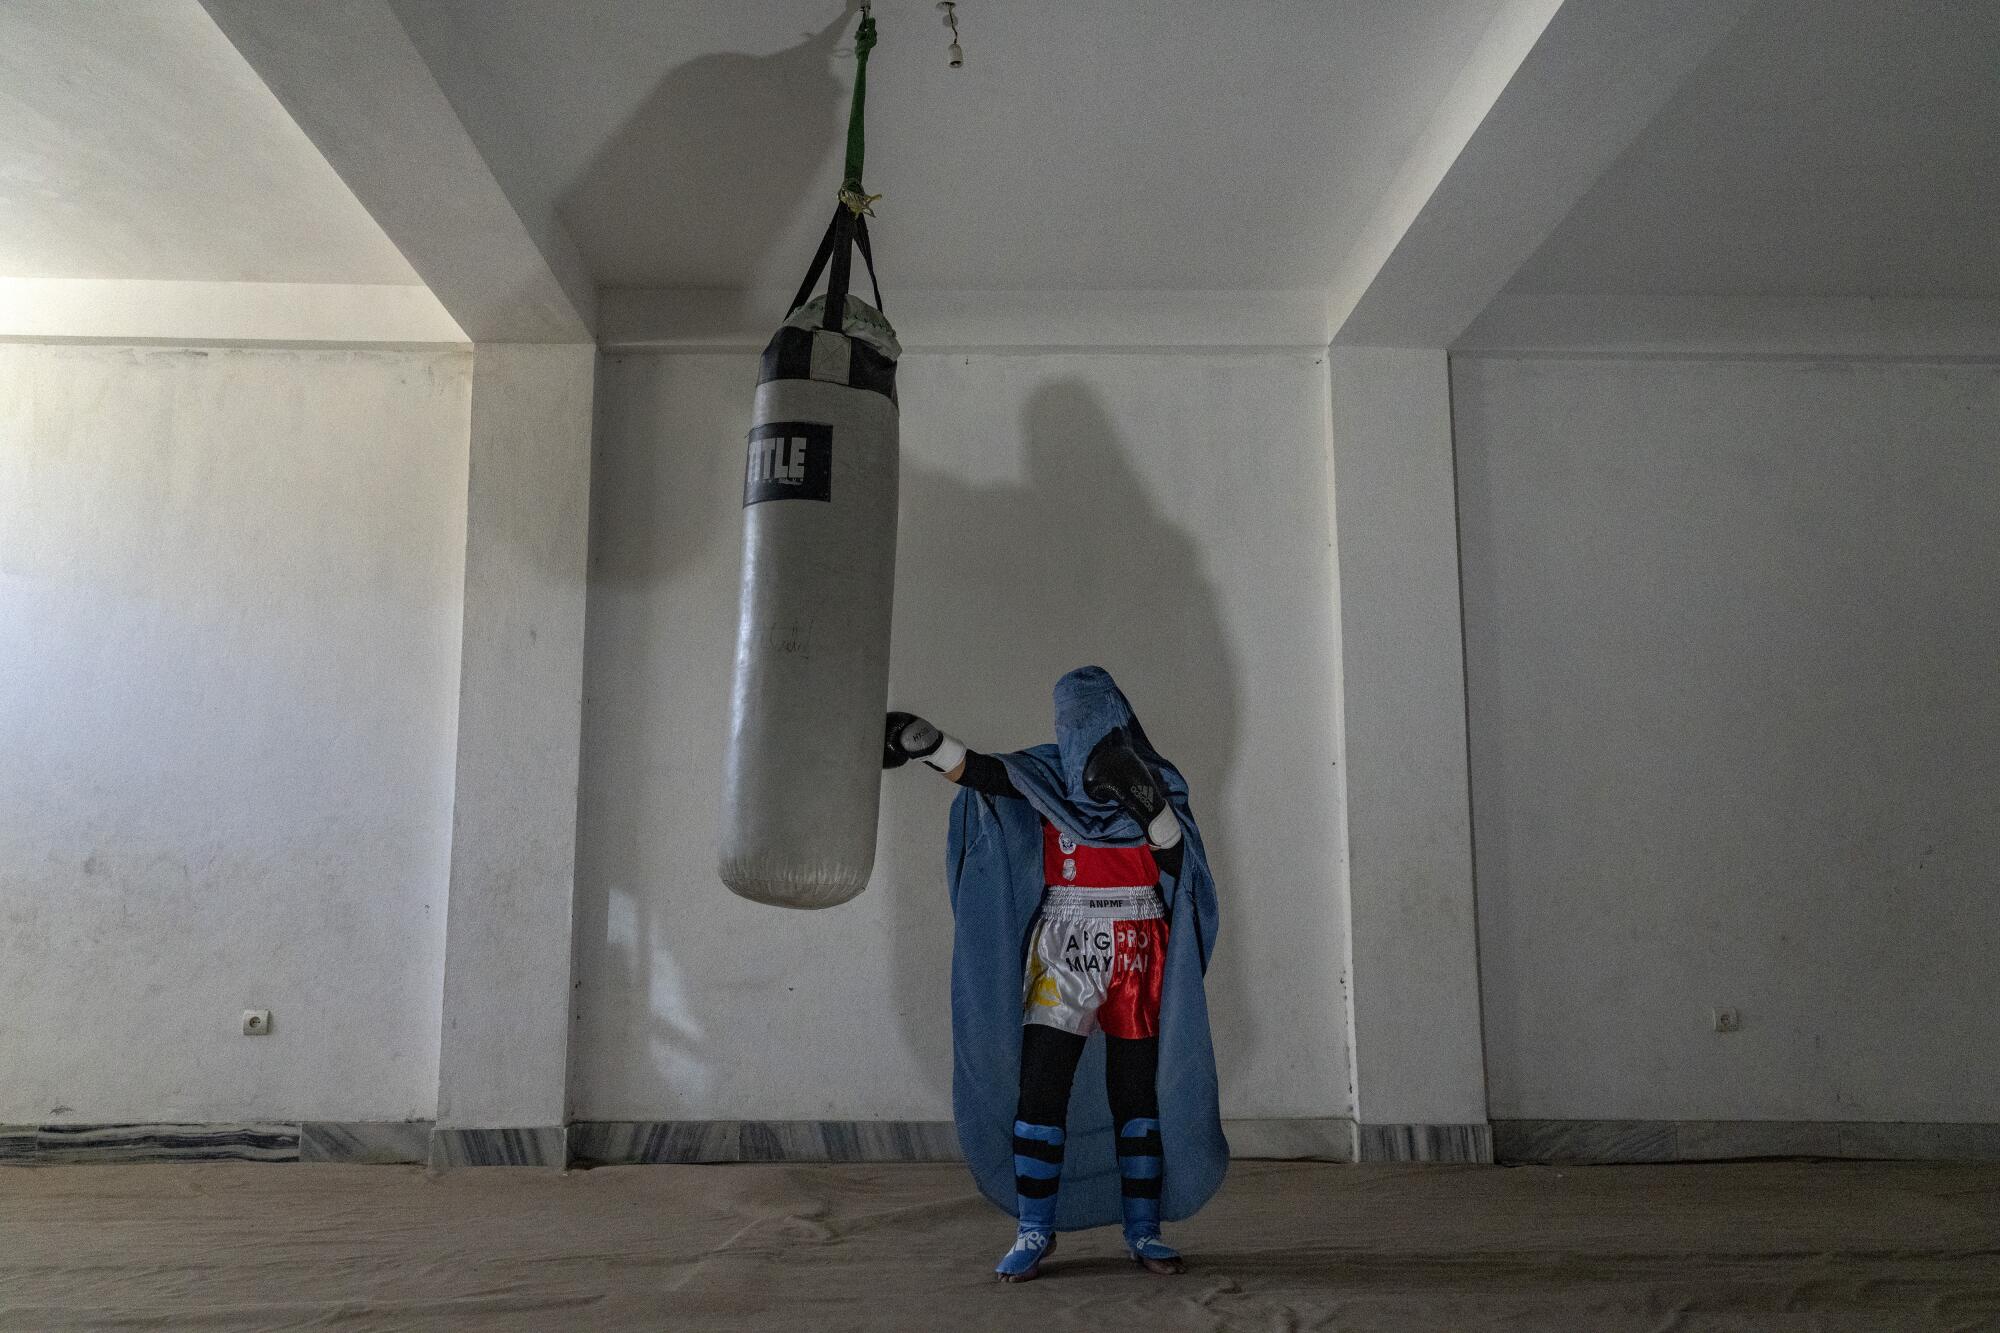 A woman wearing a burqa and boxing gloves punches a workout bag.